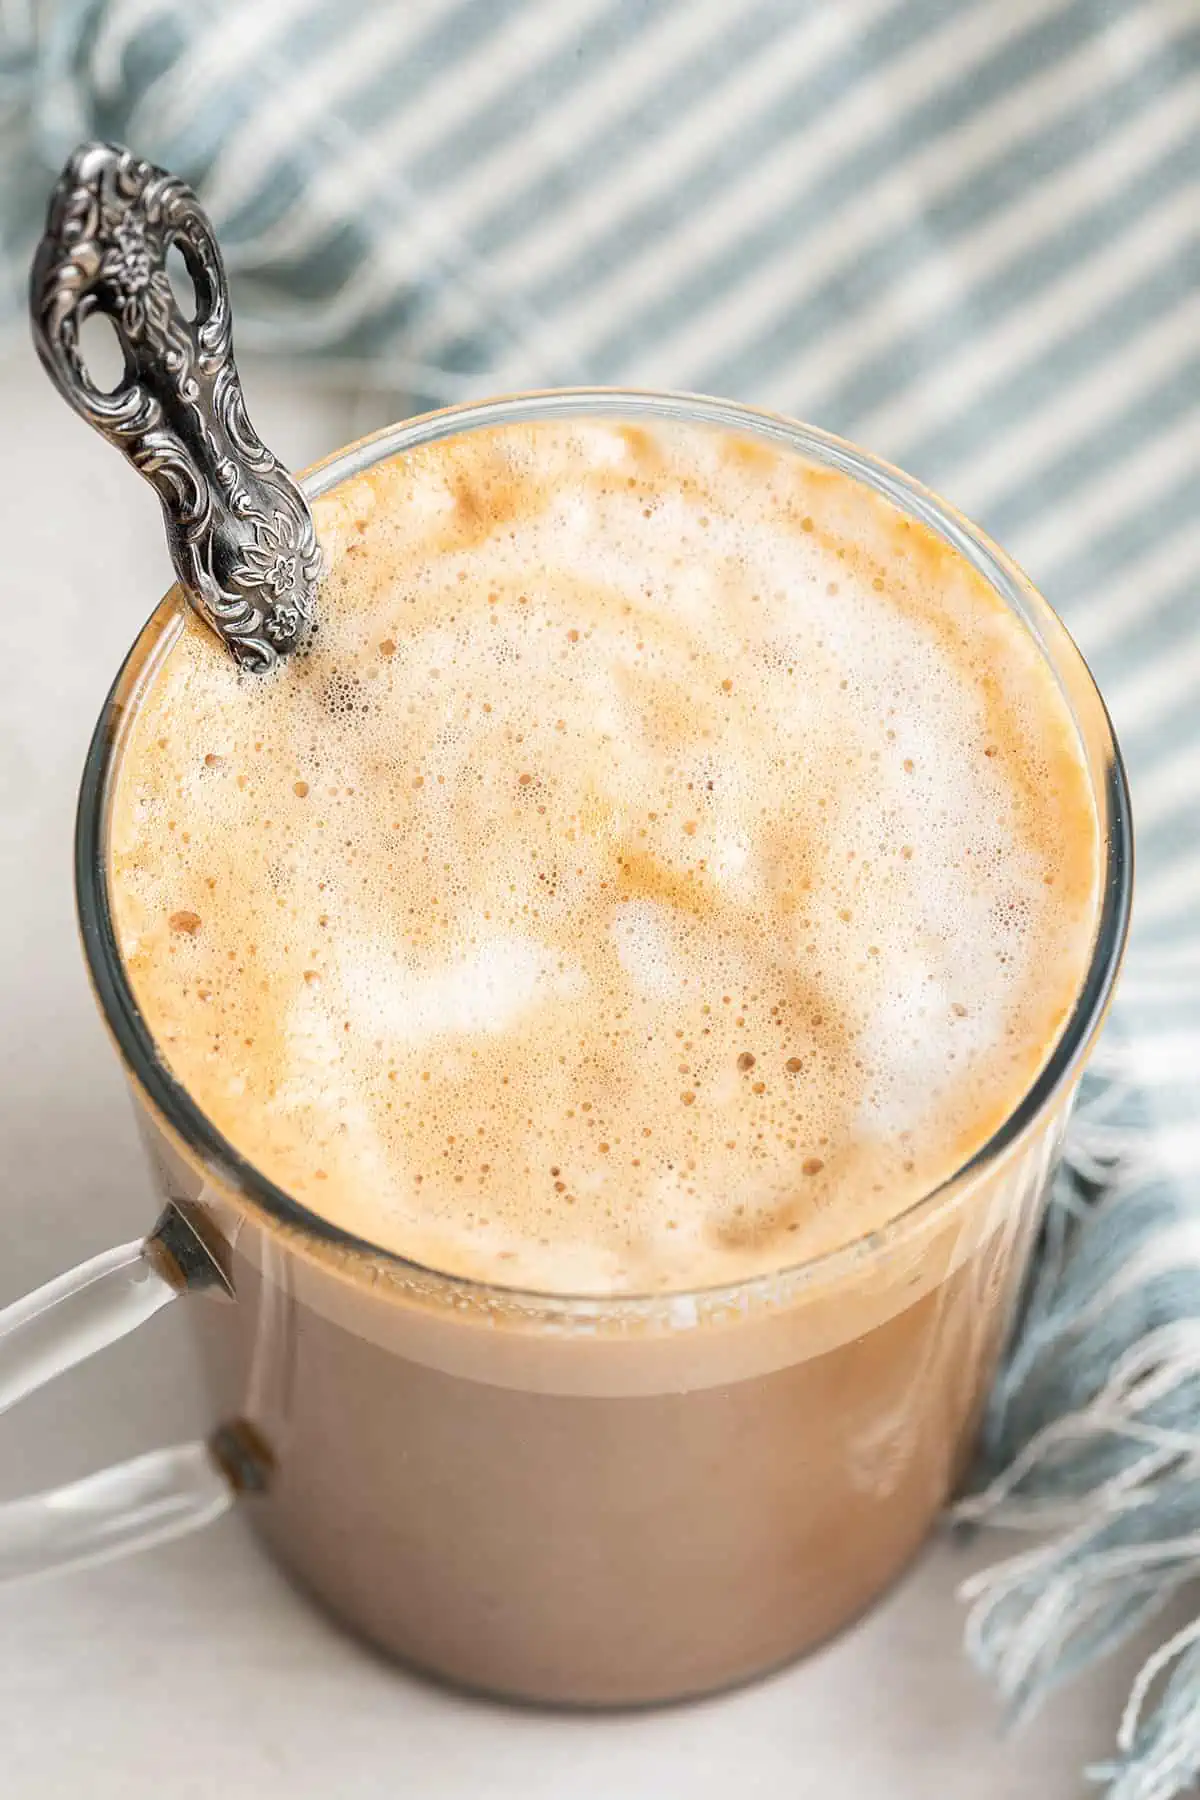 Overhead view of a cortadito in a glass, with a spoon in it, next to a kitchen towel